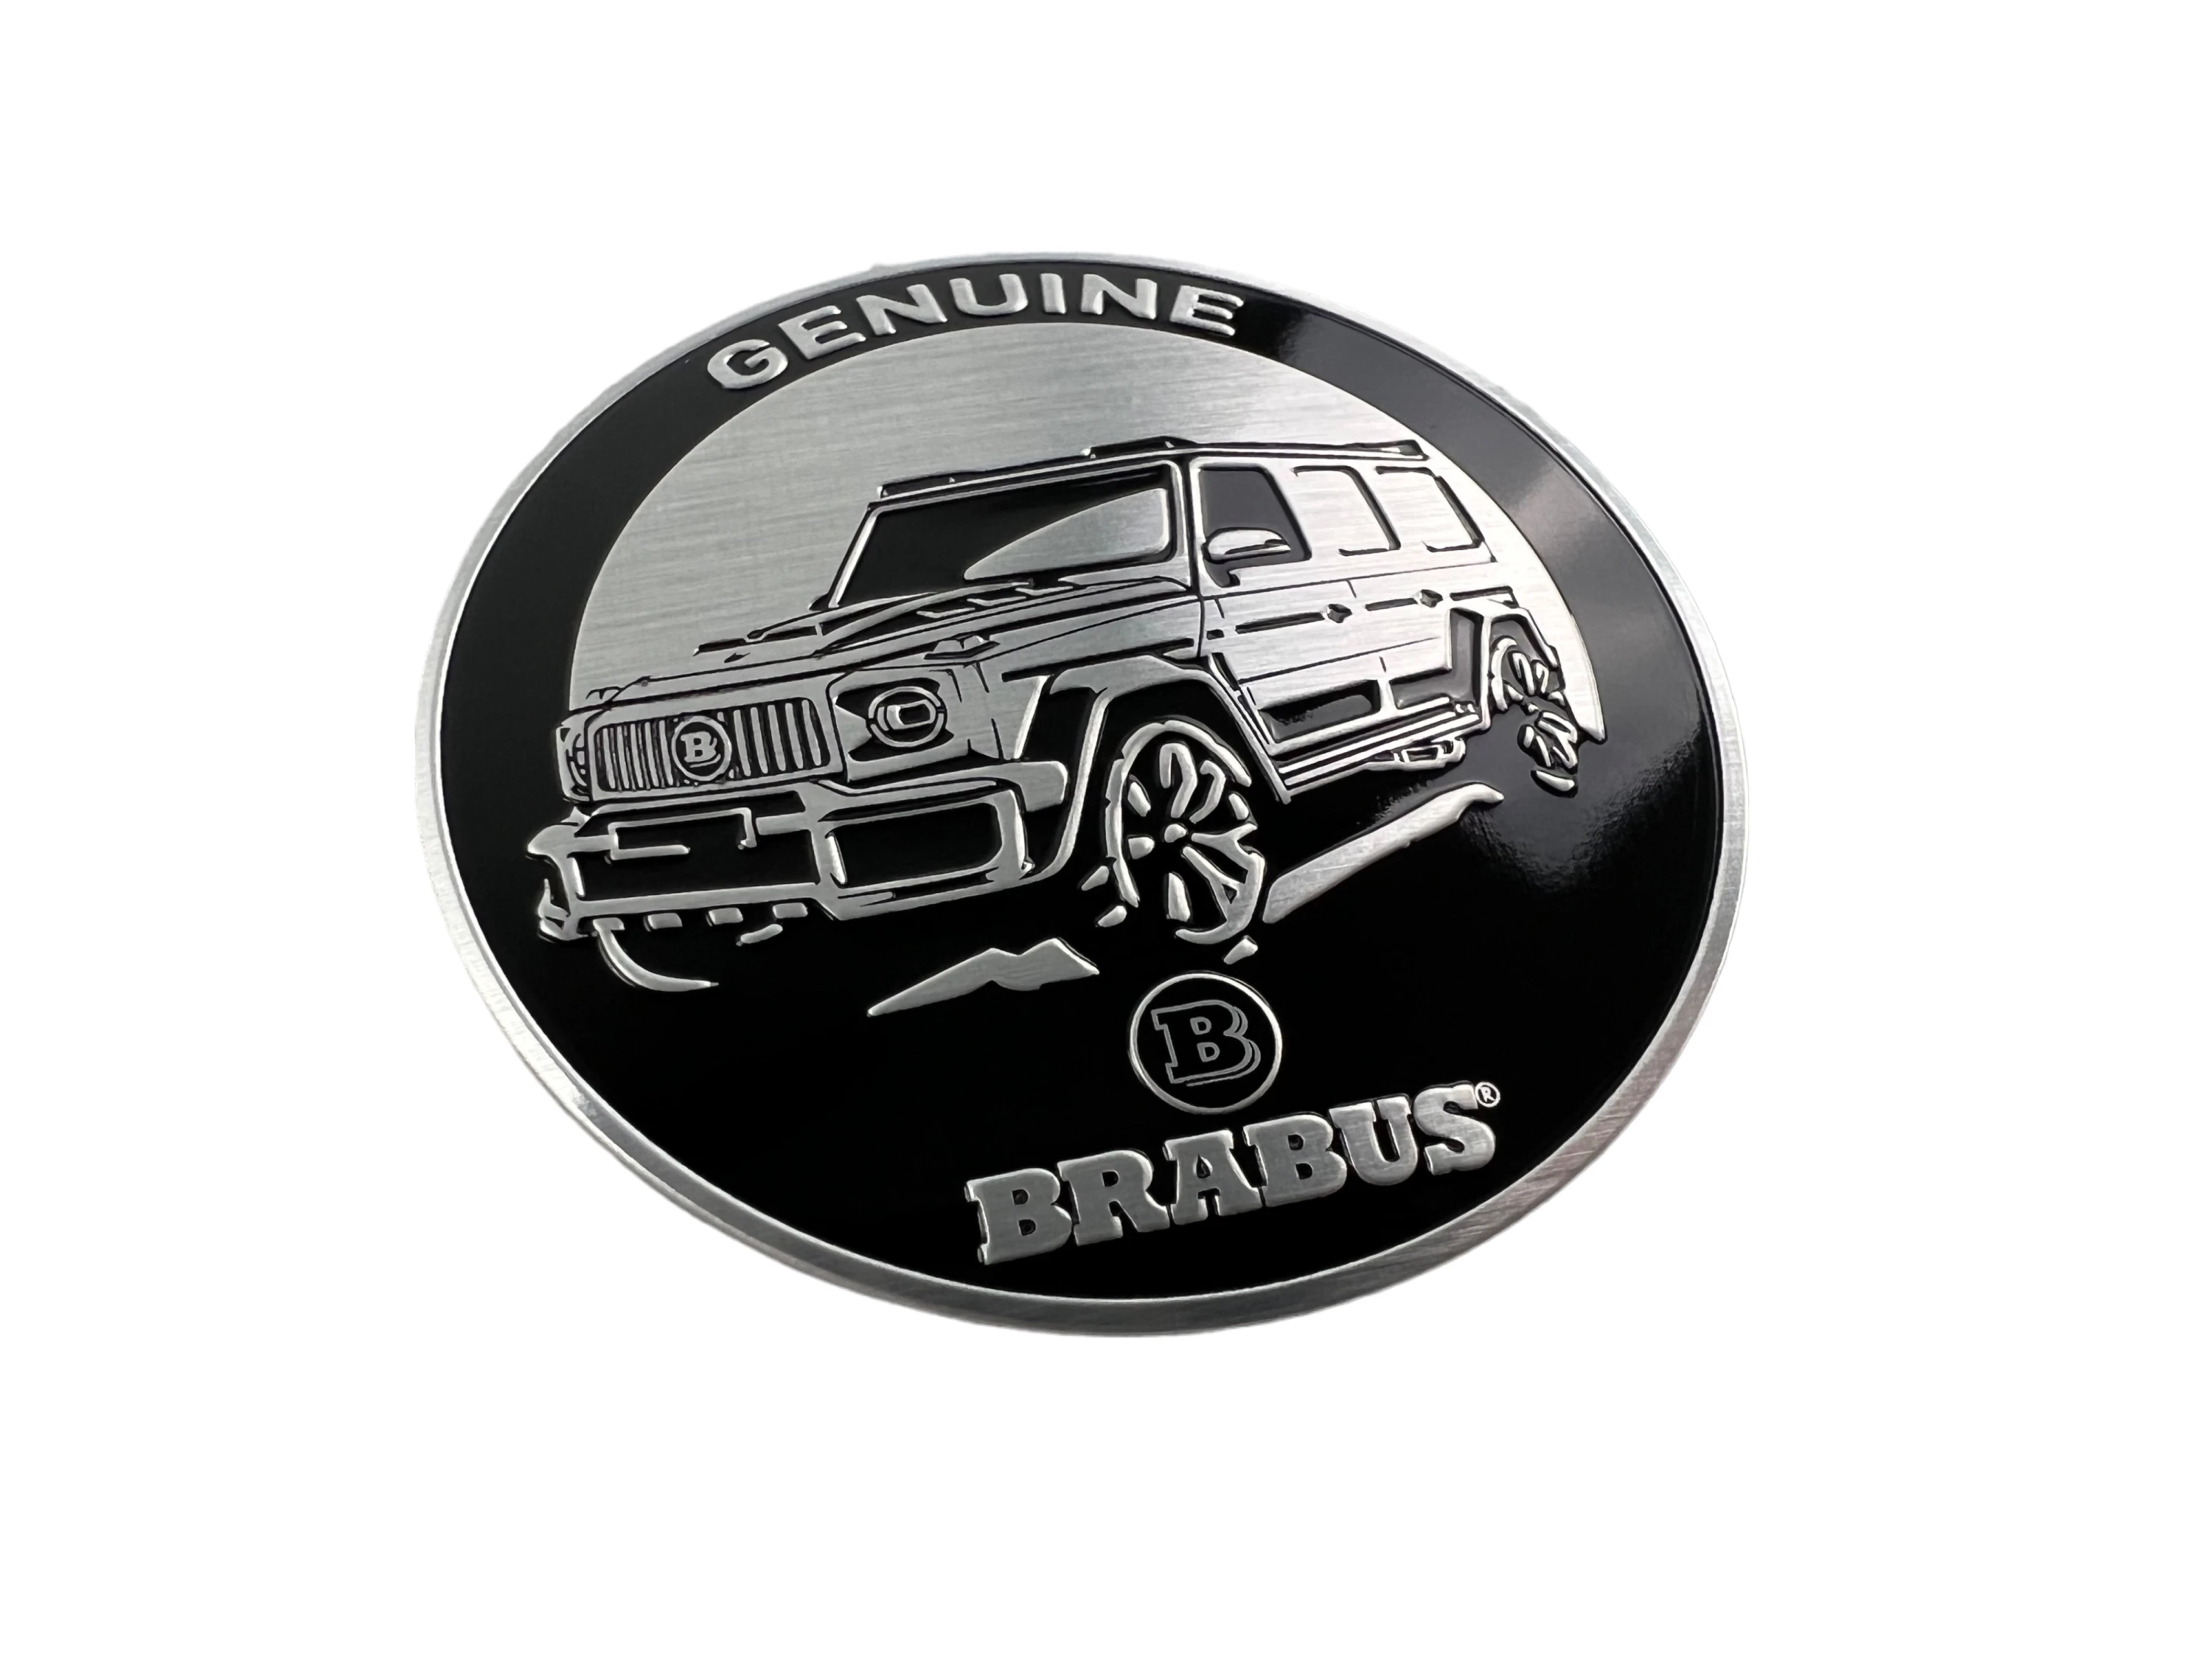 BRABUS Emblem by PoloR5 on Dribbble